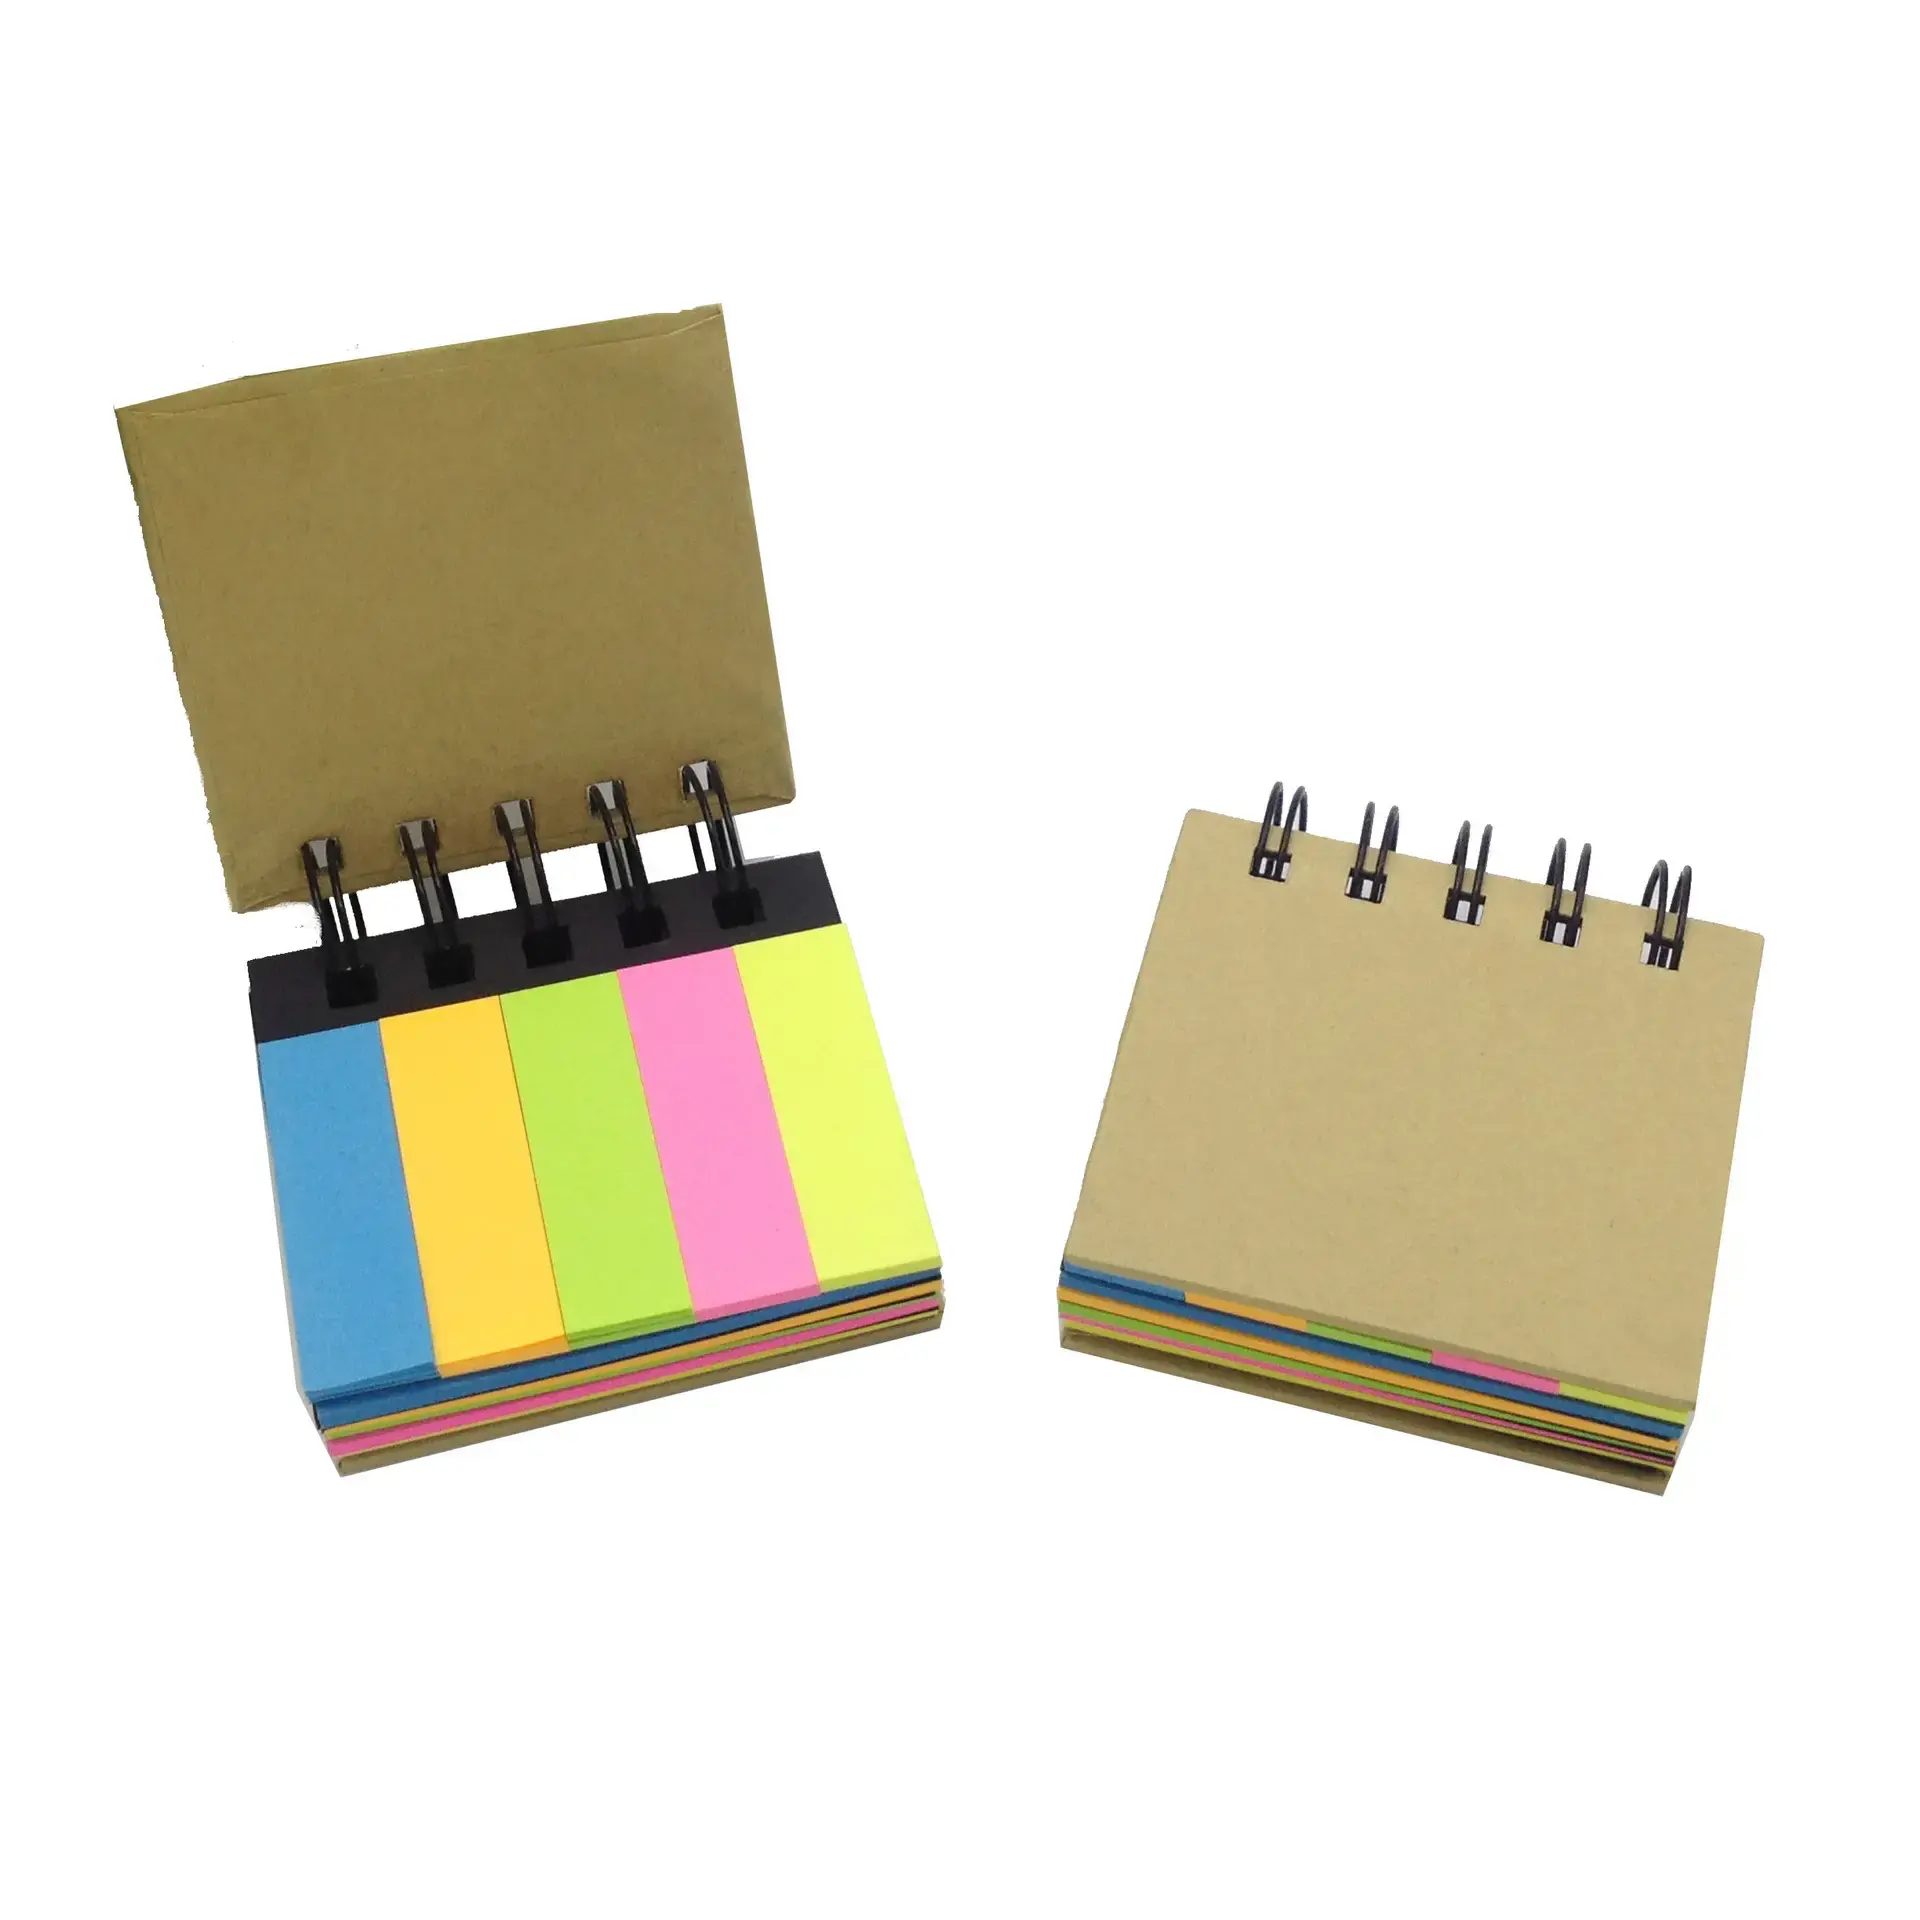 New custom design printed office daily used mini sticky paper notepads for home gift